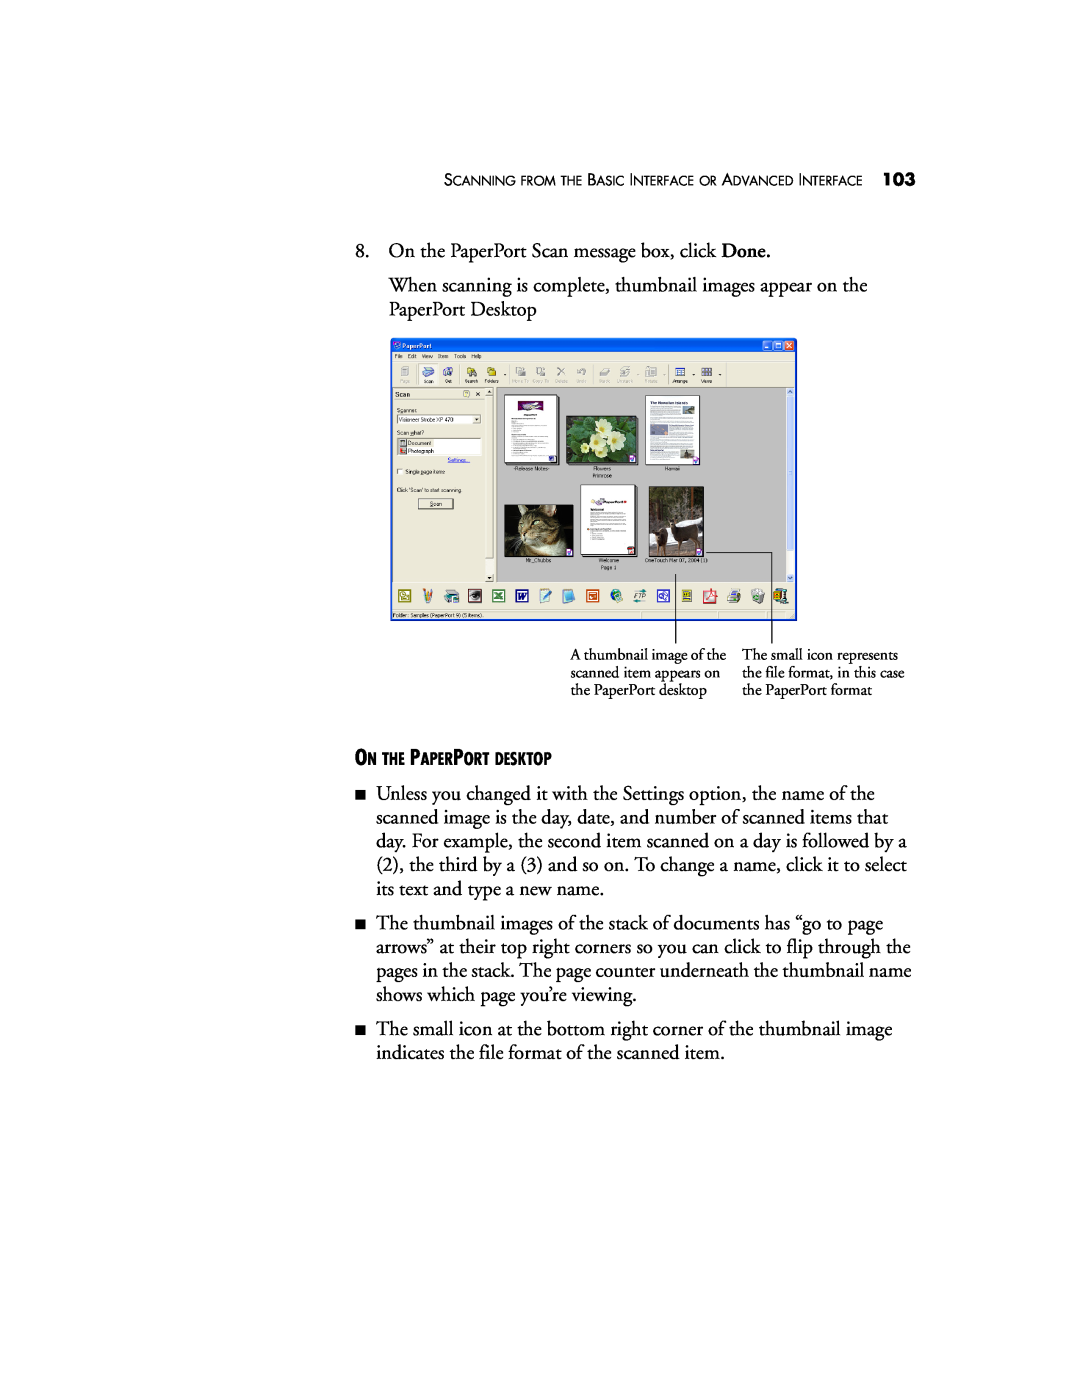 Visioneer XP 470 manual On the PaperPort Scan message box, click Done 